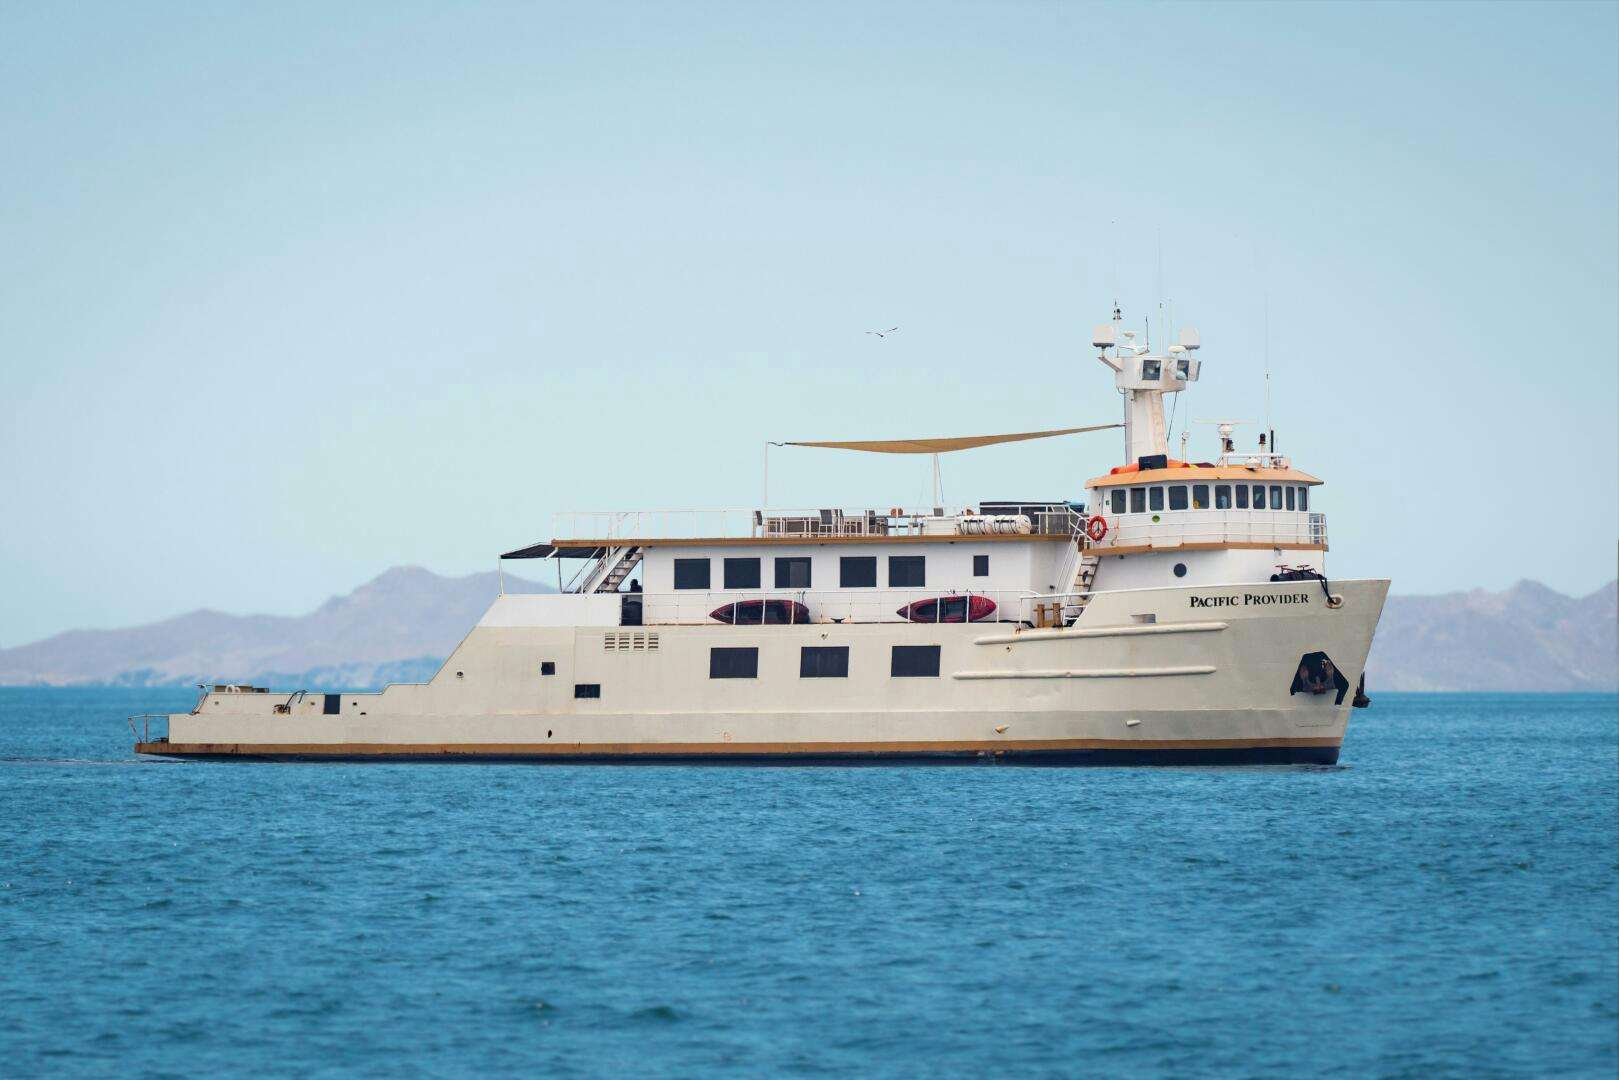 Pacific provider
Yacht for Sale